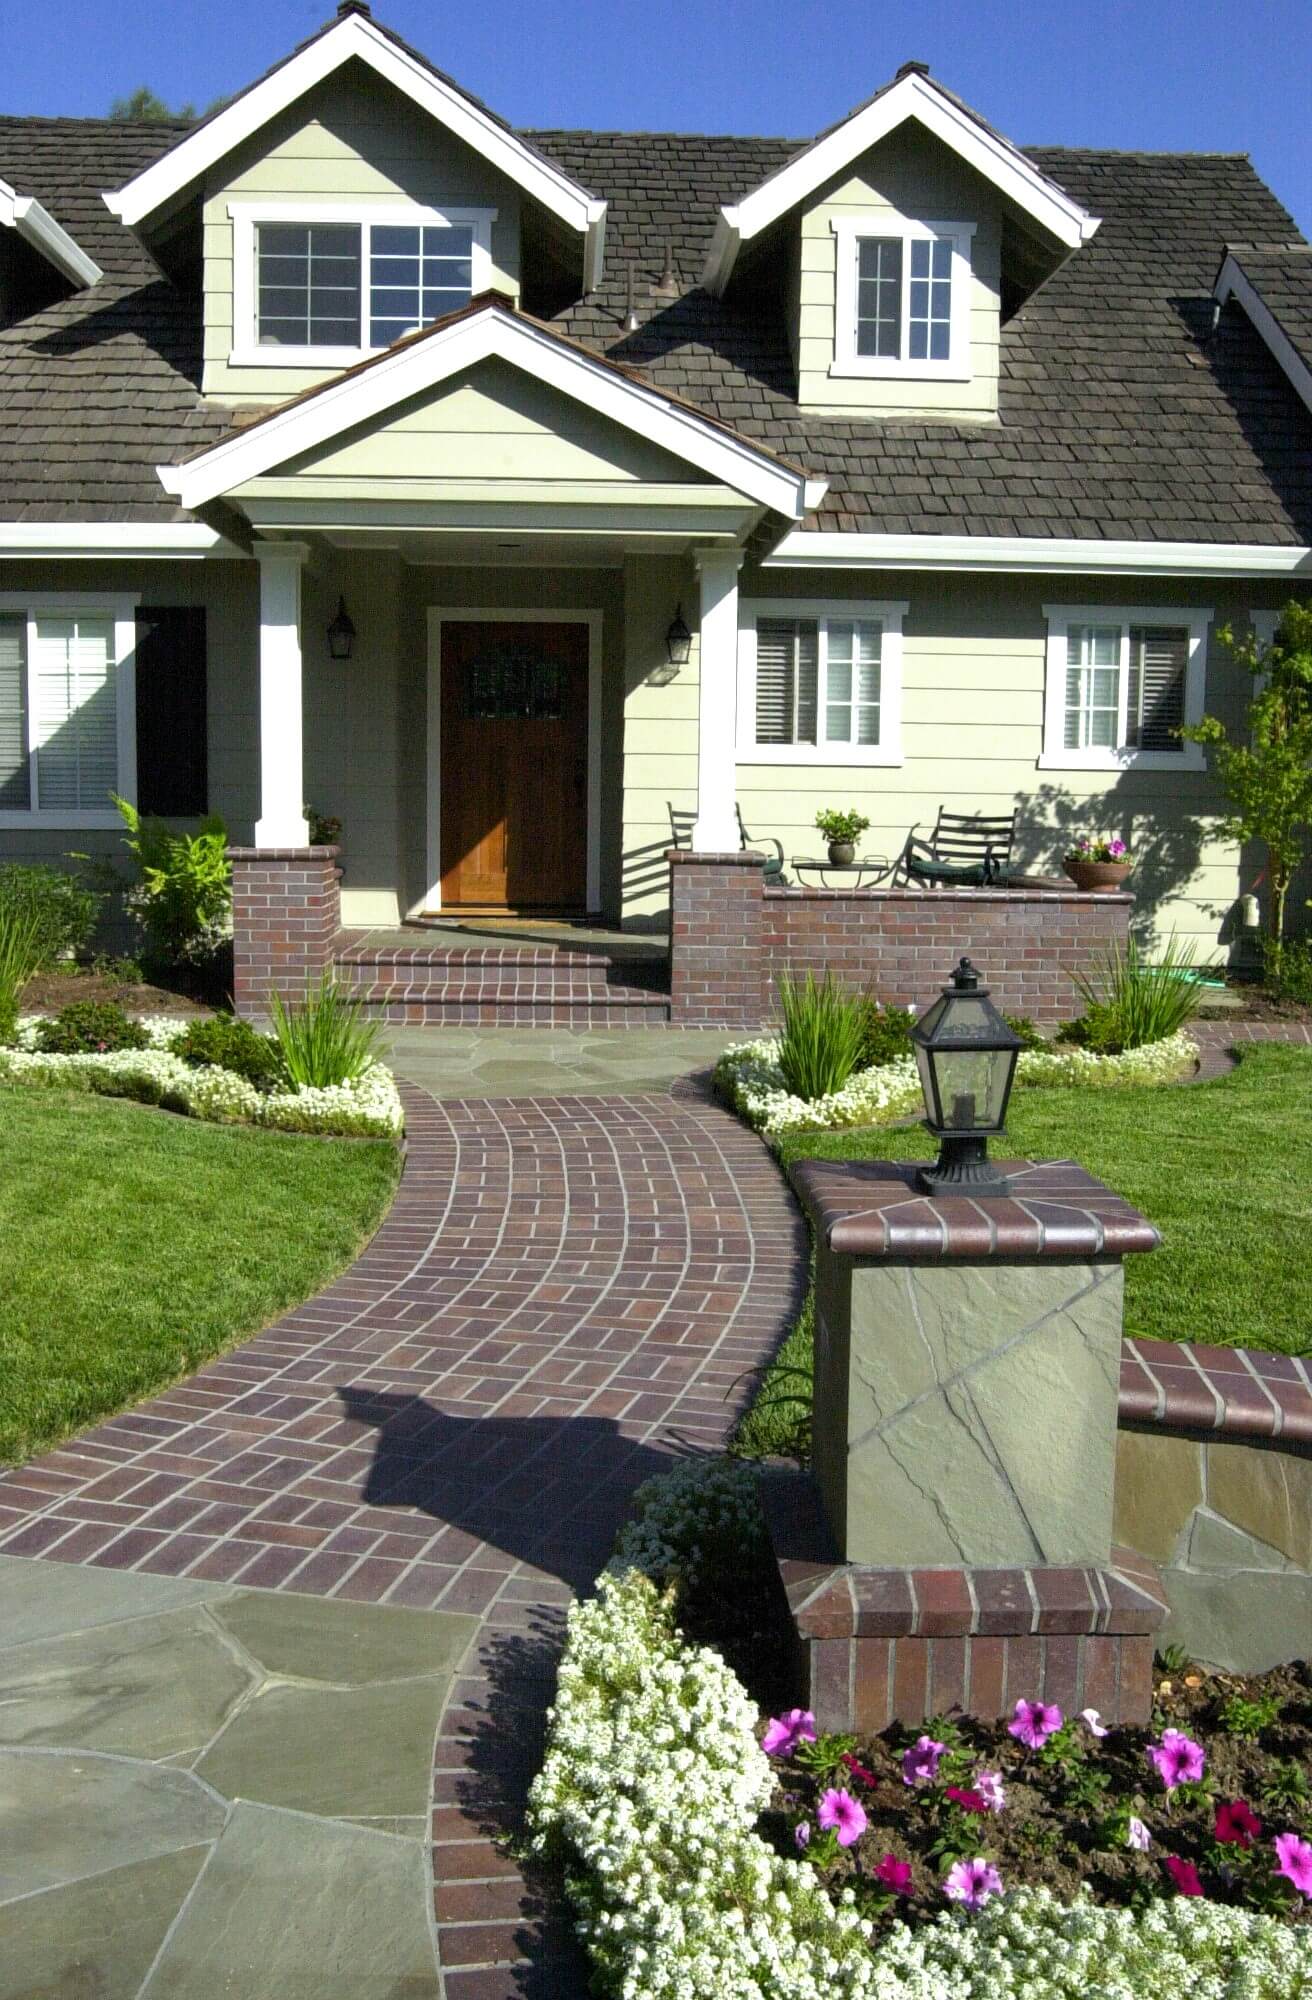 Front yard walkway made from a combination of red brick in a unique pattern and irregular paver stone